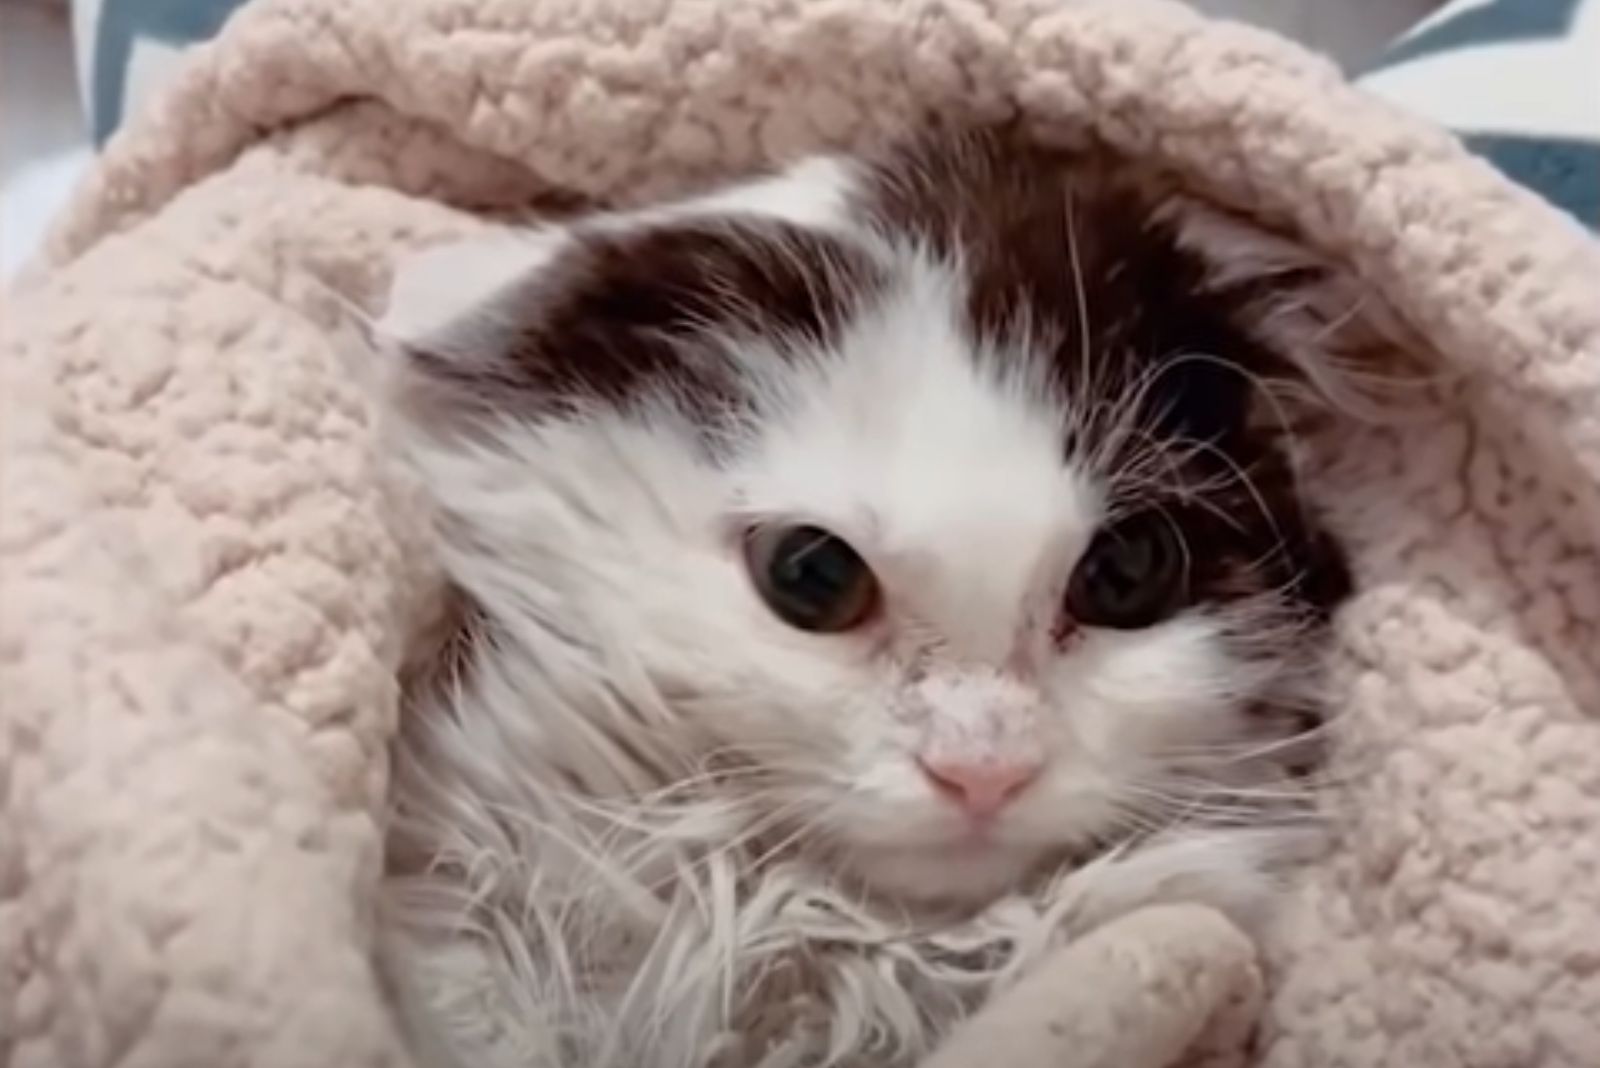 cat wrapped up in a towel